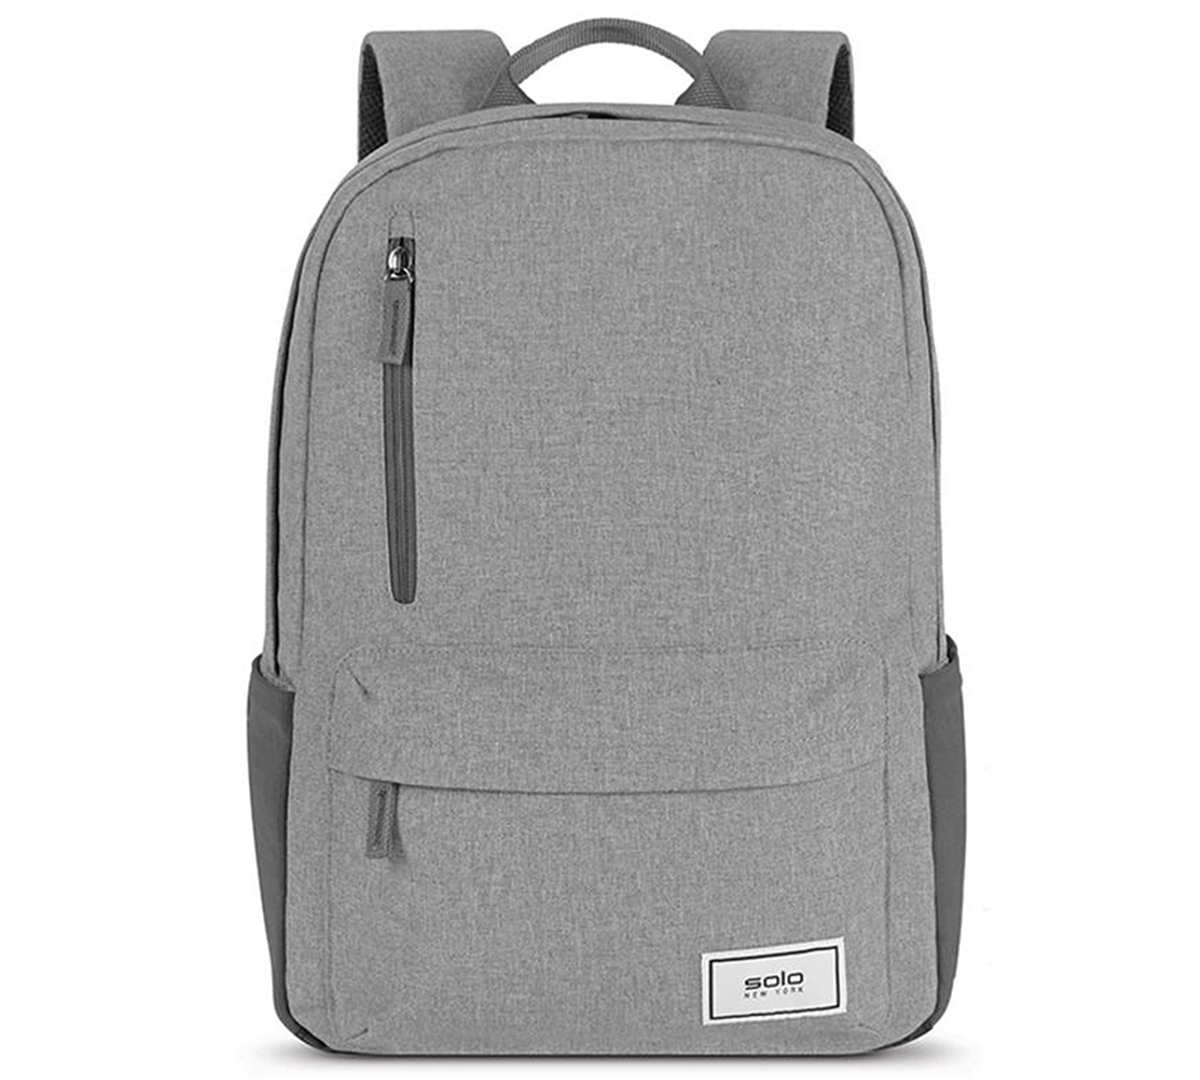 Solo New York Re:cover Backpack In Gray